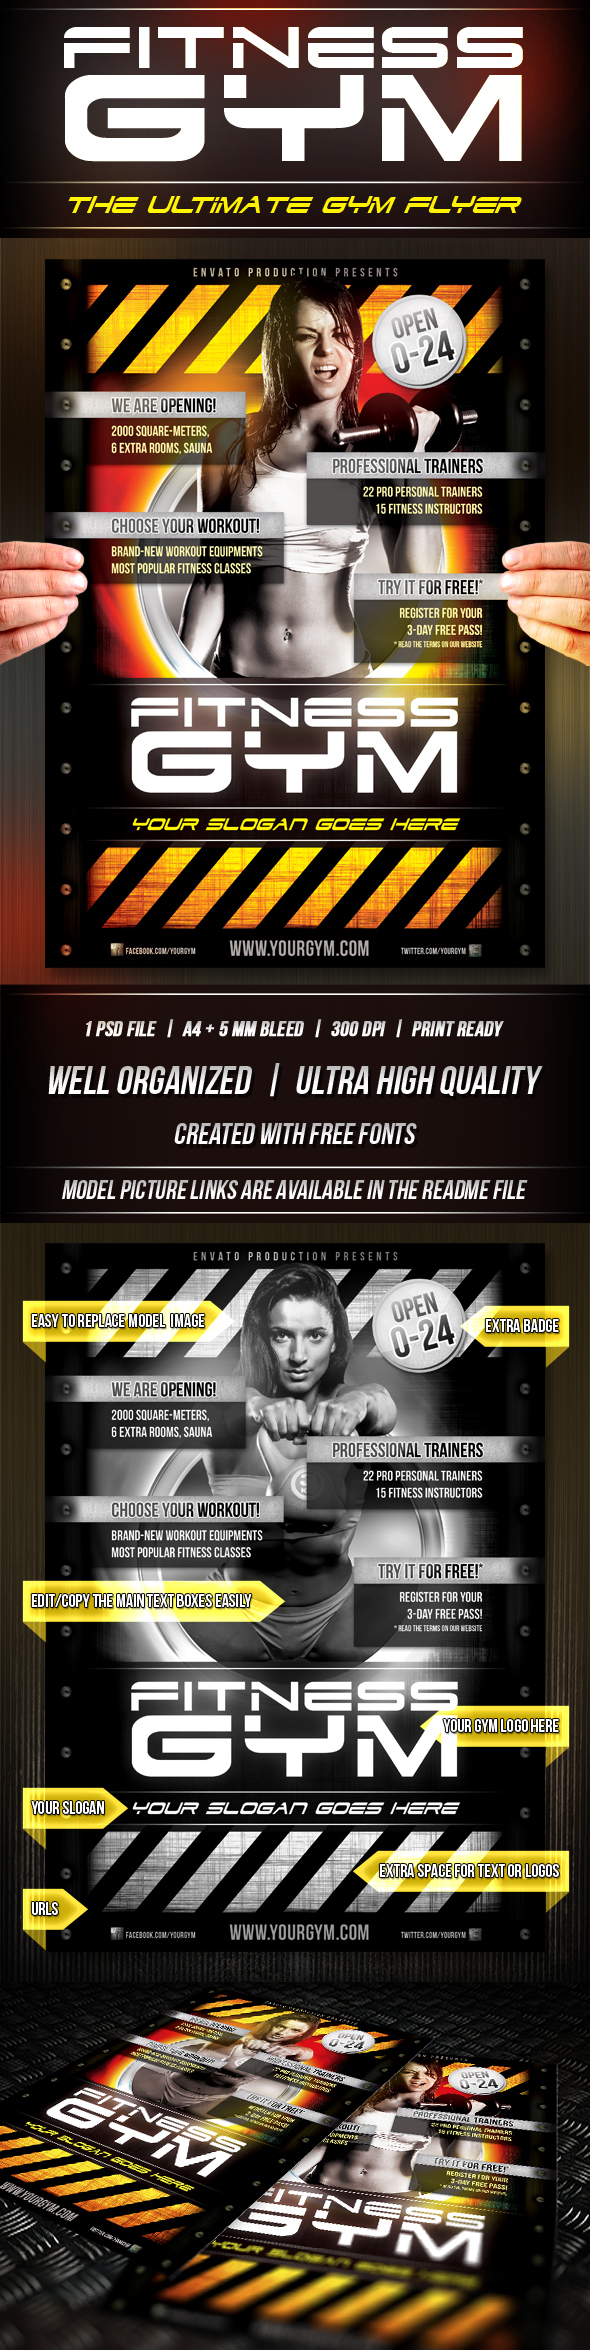 a4 BodyBuilding colorful Event fire fitness flyer gym man modern print professional Quality red